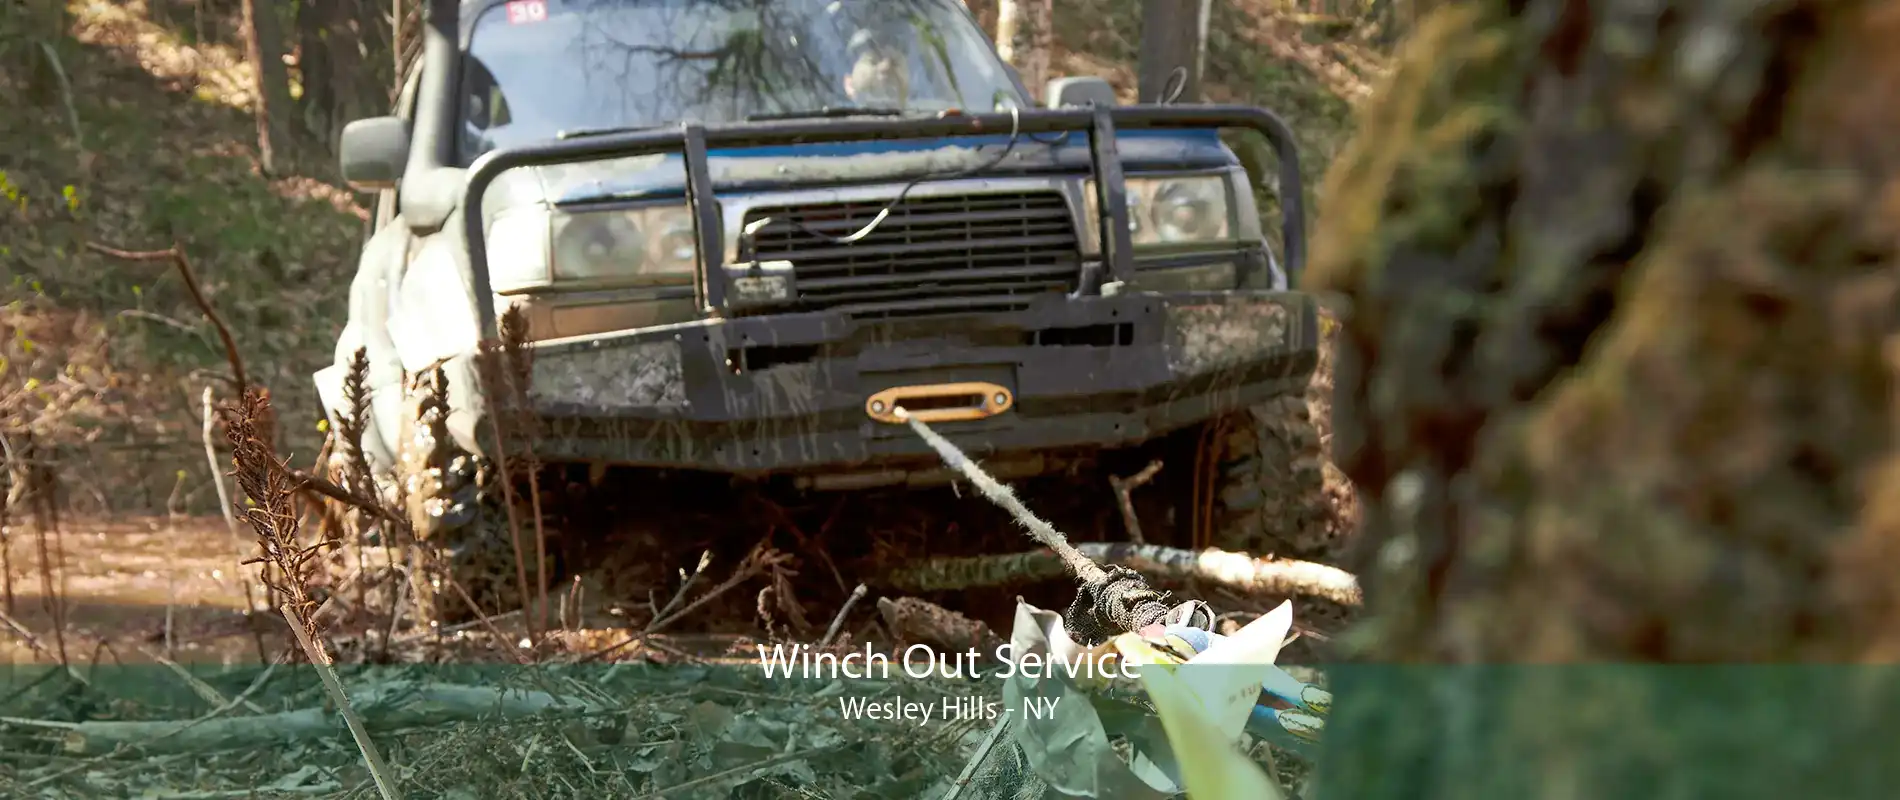 Winch Out Service Wesley Hills - NY